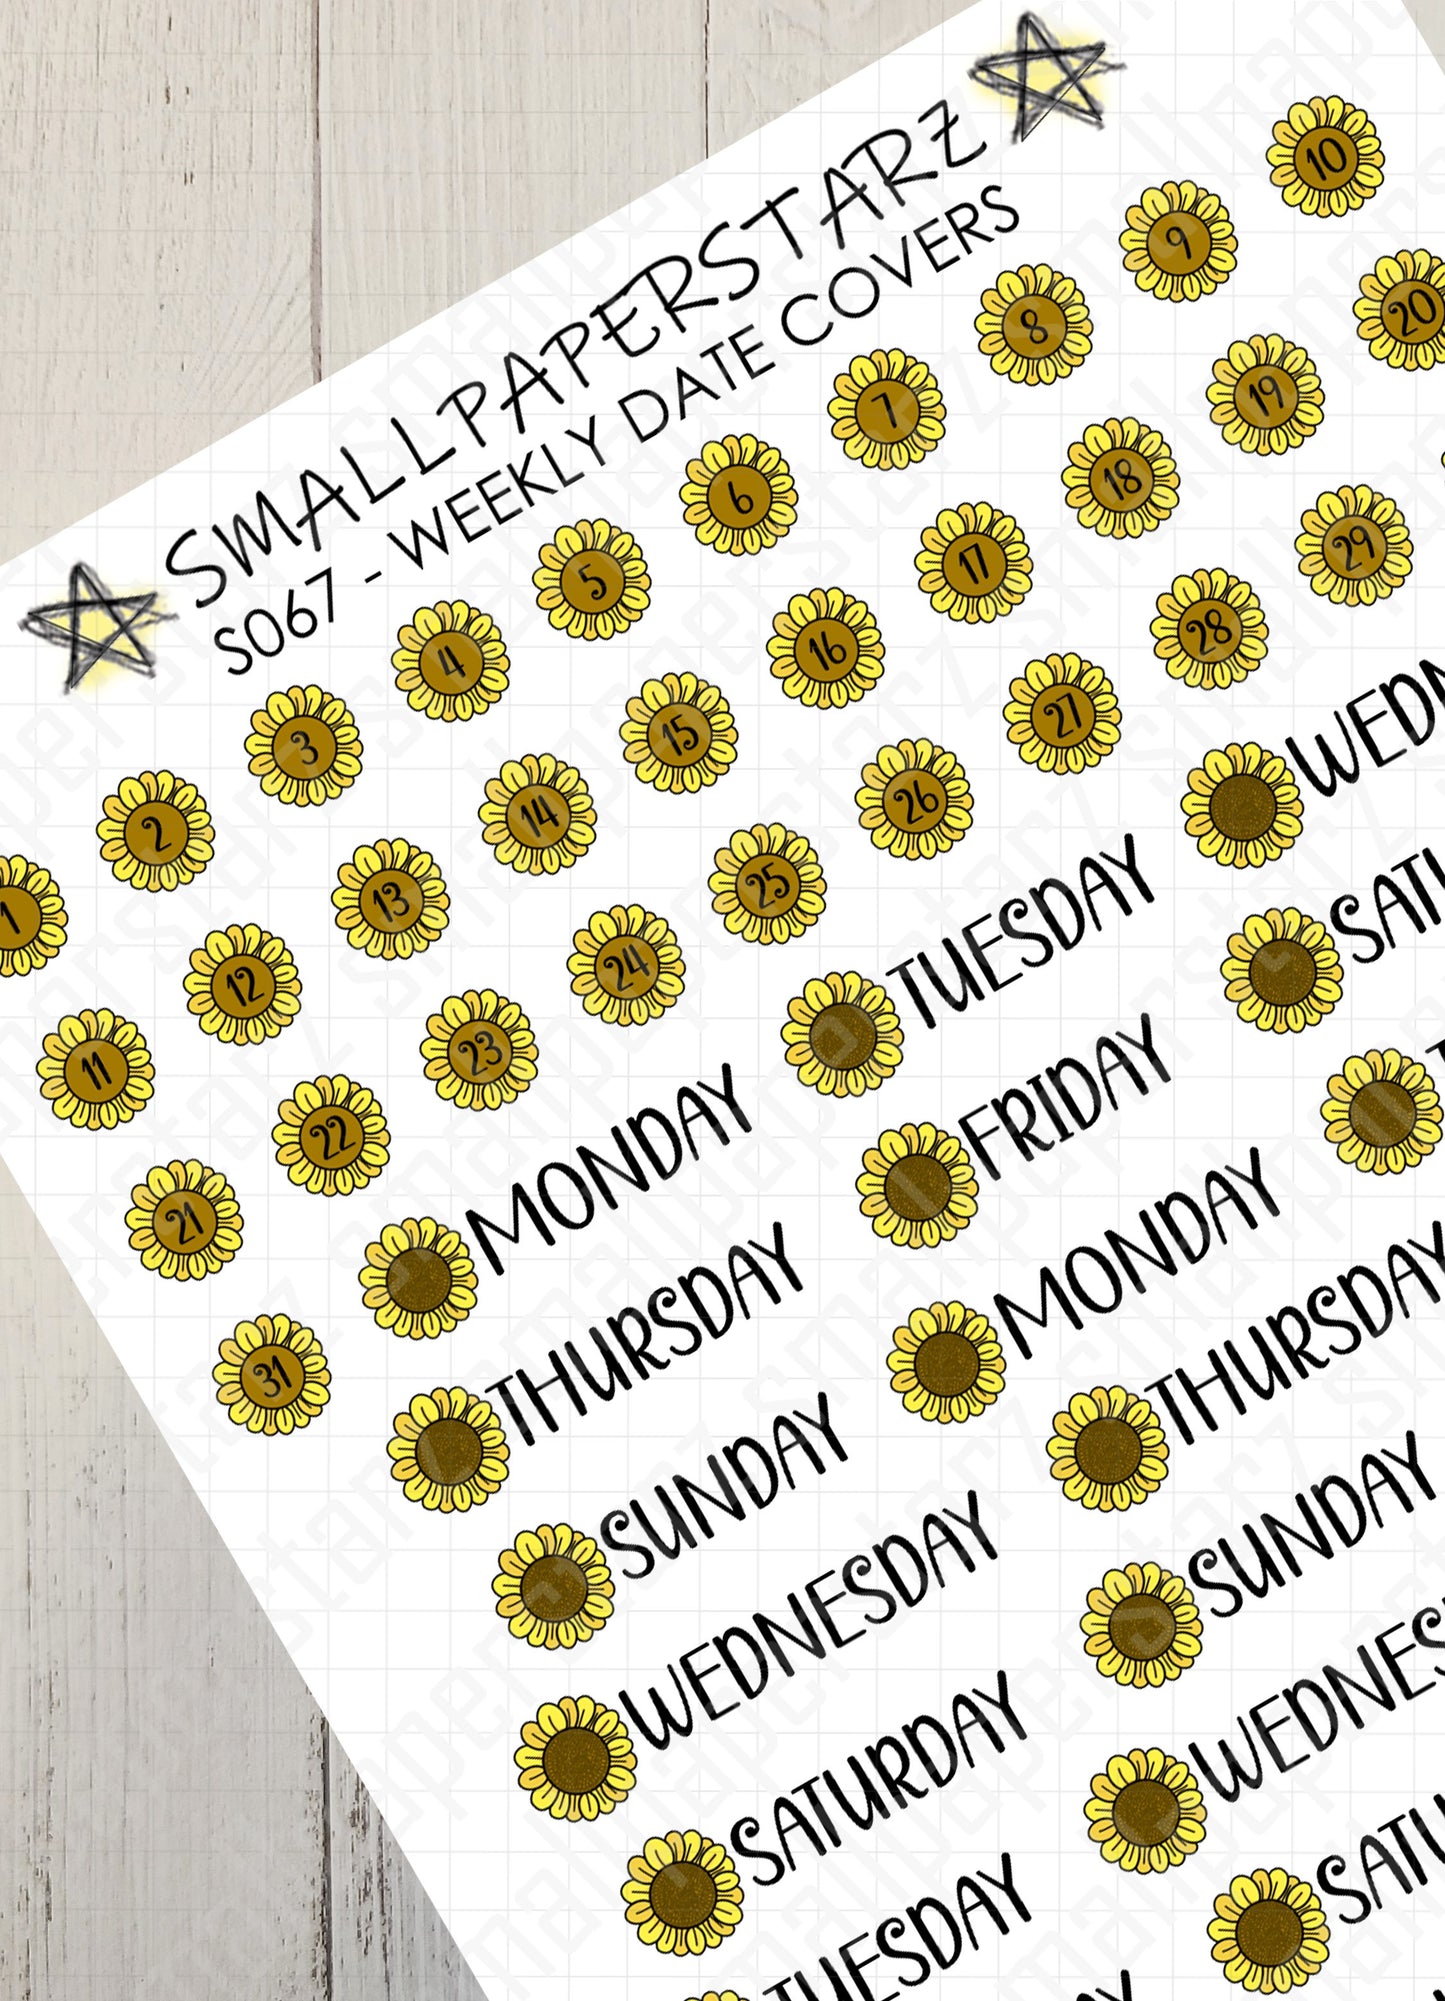 S067 - Sunflower Weekly Date Covers Sticker Sheet